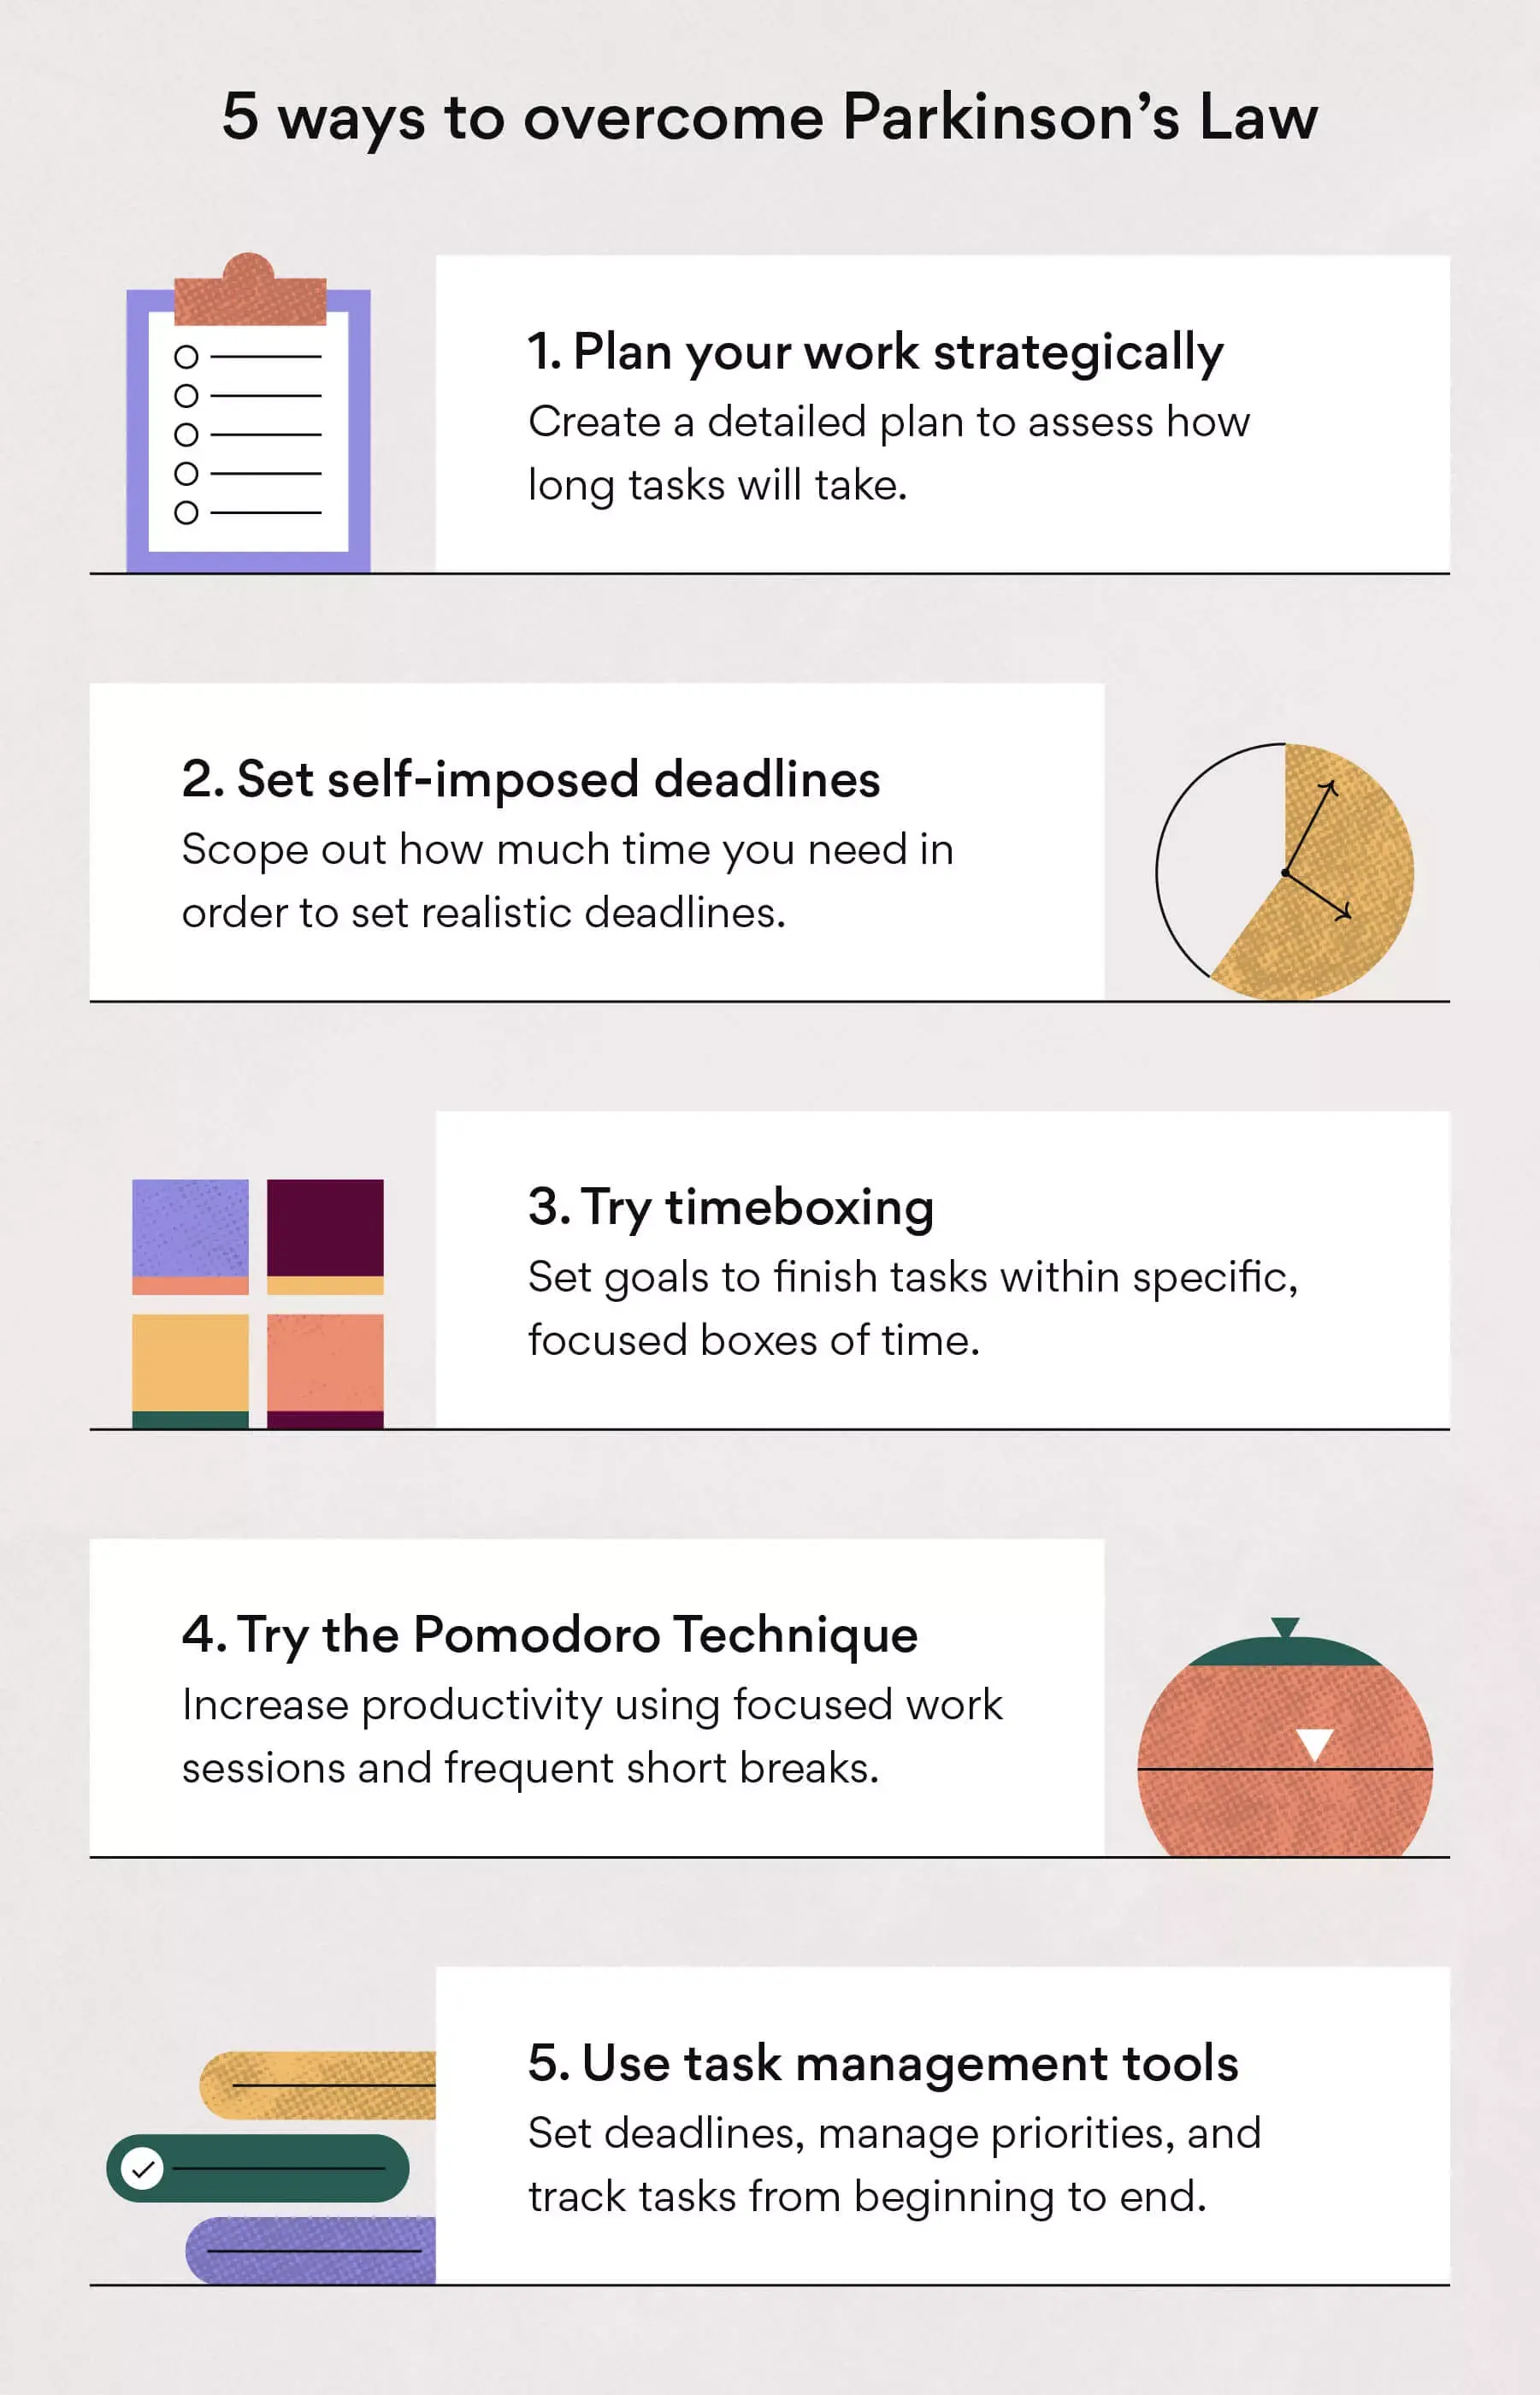 [Inline illustration] 5 ways to overcome Parkinson's law (infographic)